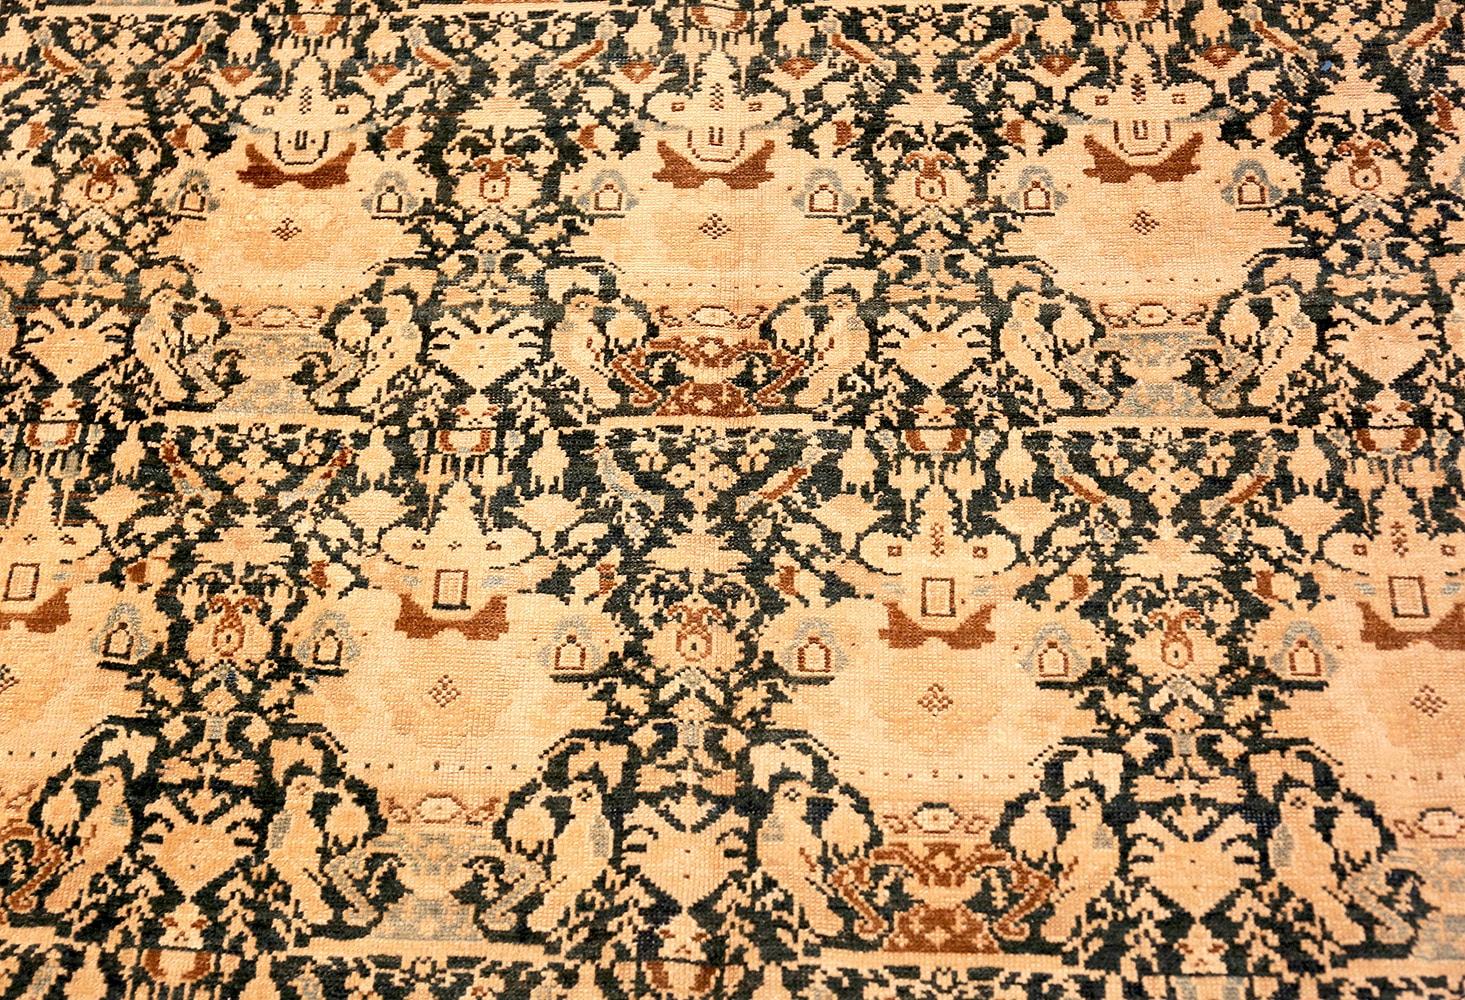 Gallery Size Antique Tribal Persian Malayer Rug, Country of Origin / Rug Type: Persian Rugs, Circa Date: 1900. Size: 5 ft x 9 ft 9 in (1.52 m x 2.97 m)

 